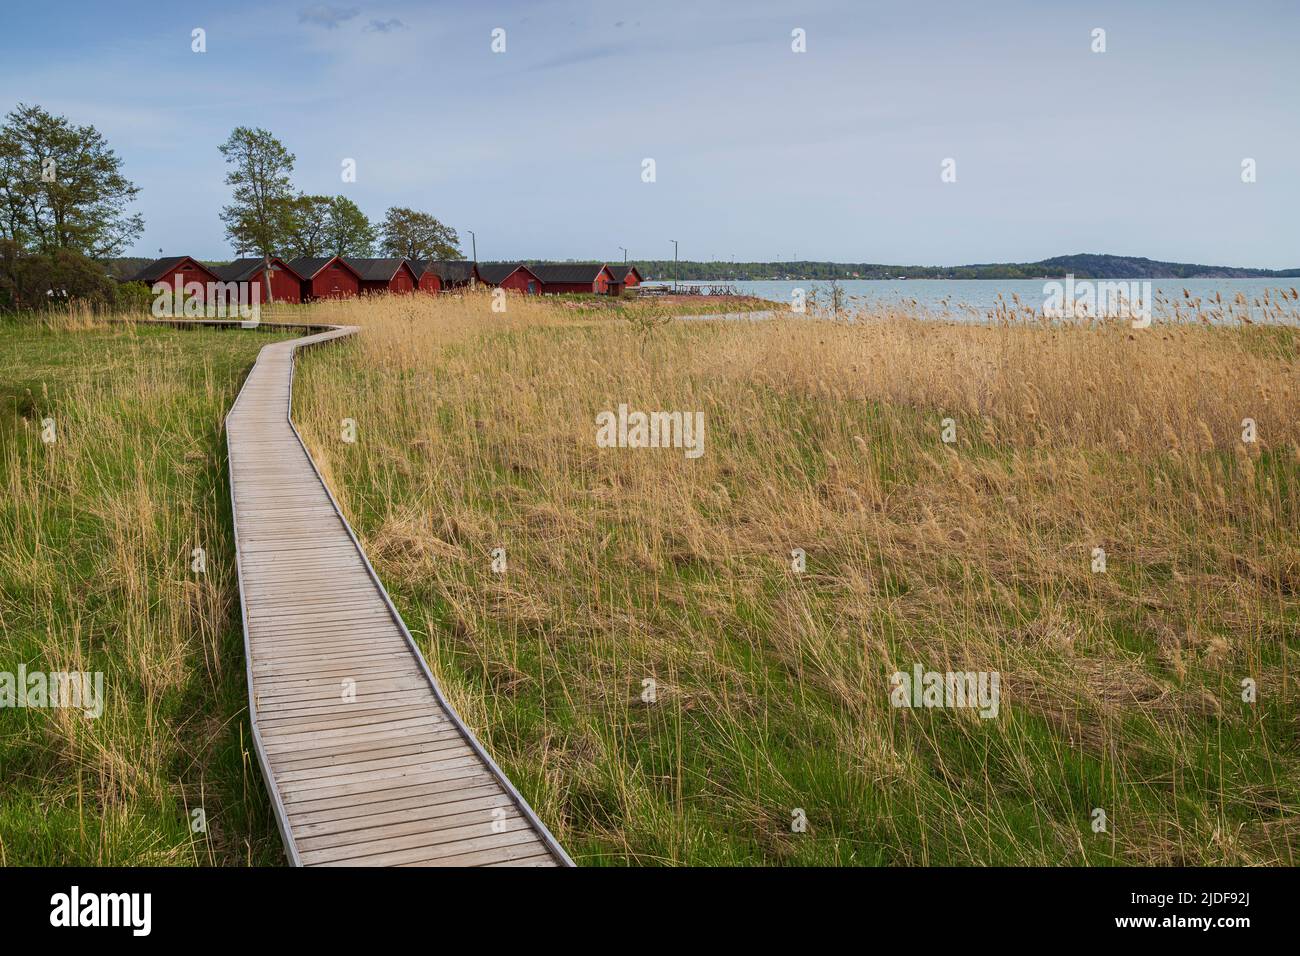 Wooden walkway on a field on the coast in Mariehamn, Åland Islands, Finland, on a sunny day. Stock Photo